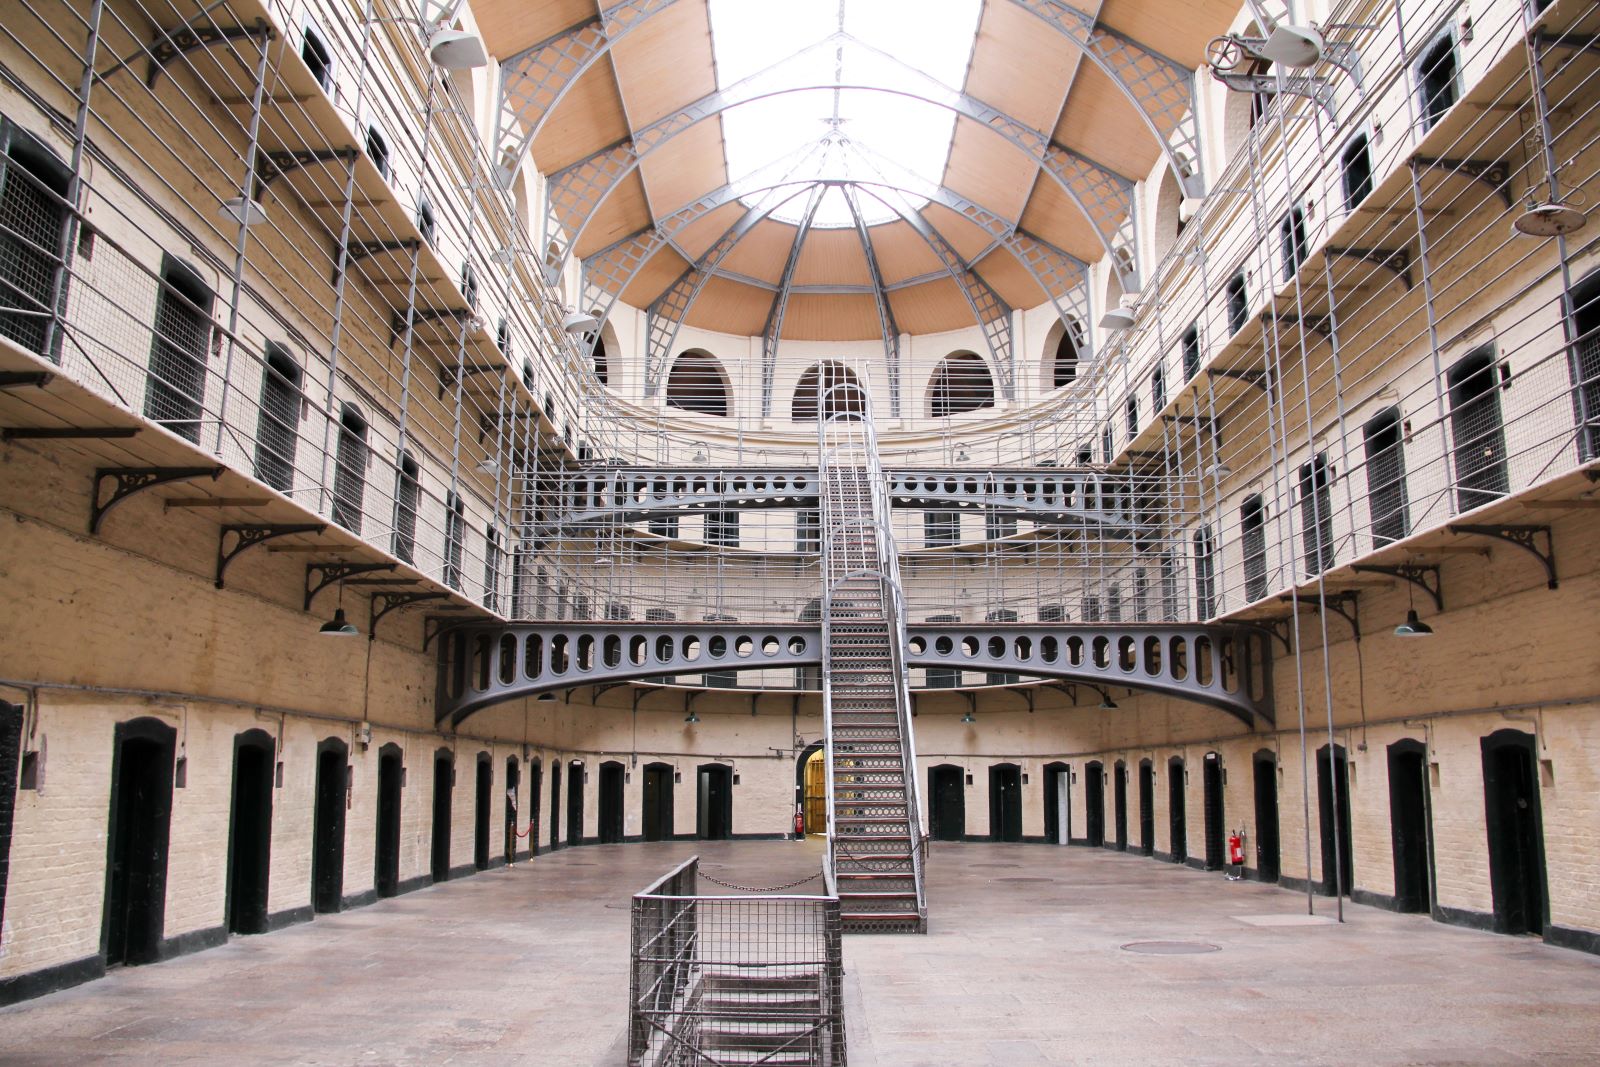 <p class="wp-caption-text">Image credit: Shutterstock / Fringe78</p>  <p>Tour Kilmainham Gaol, a former prison that now serves as a museum. It’s a sobering insight into Ireland’s struggle for independence.</p>